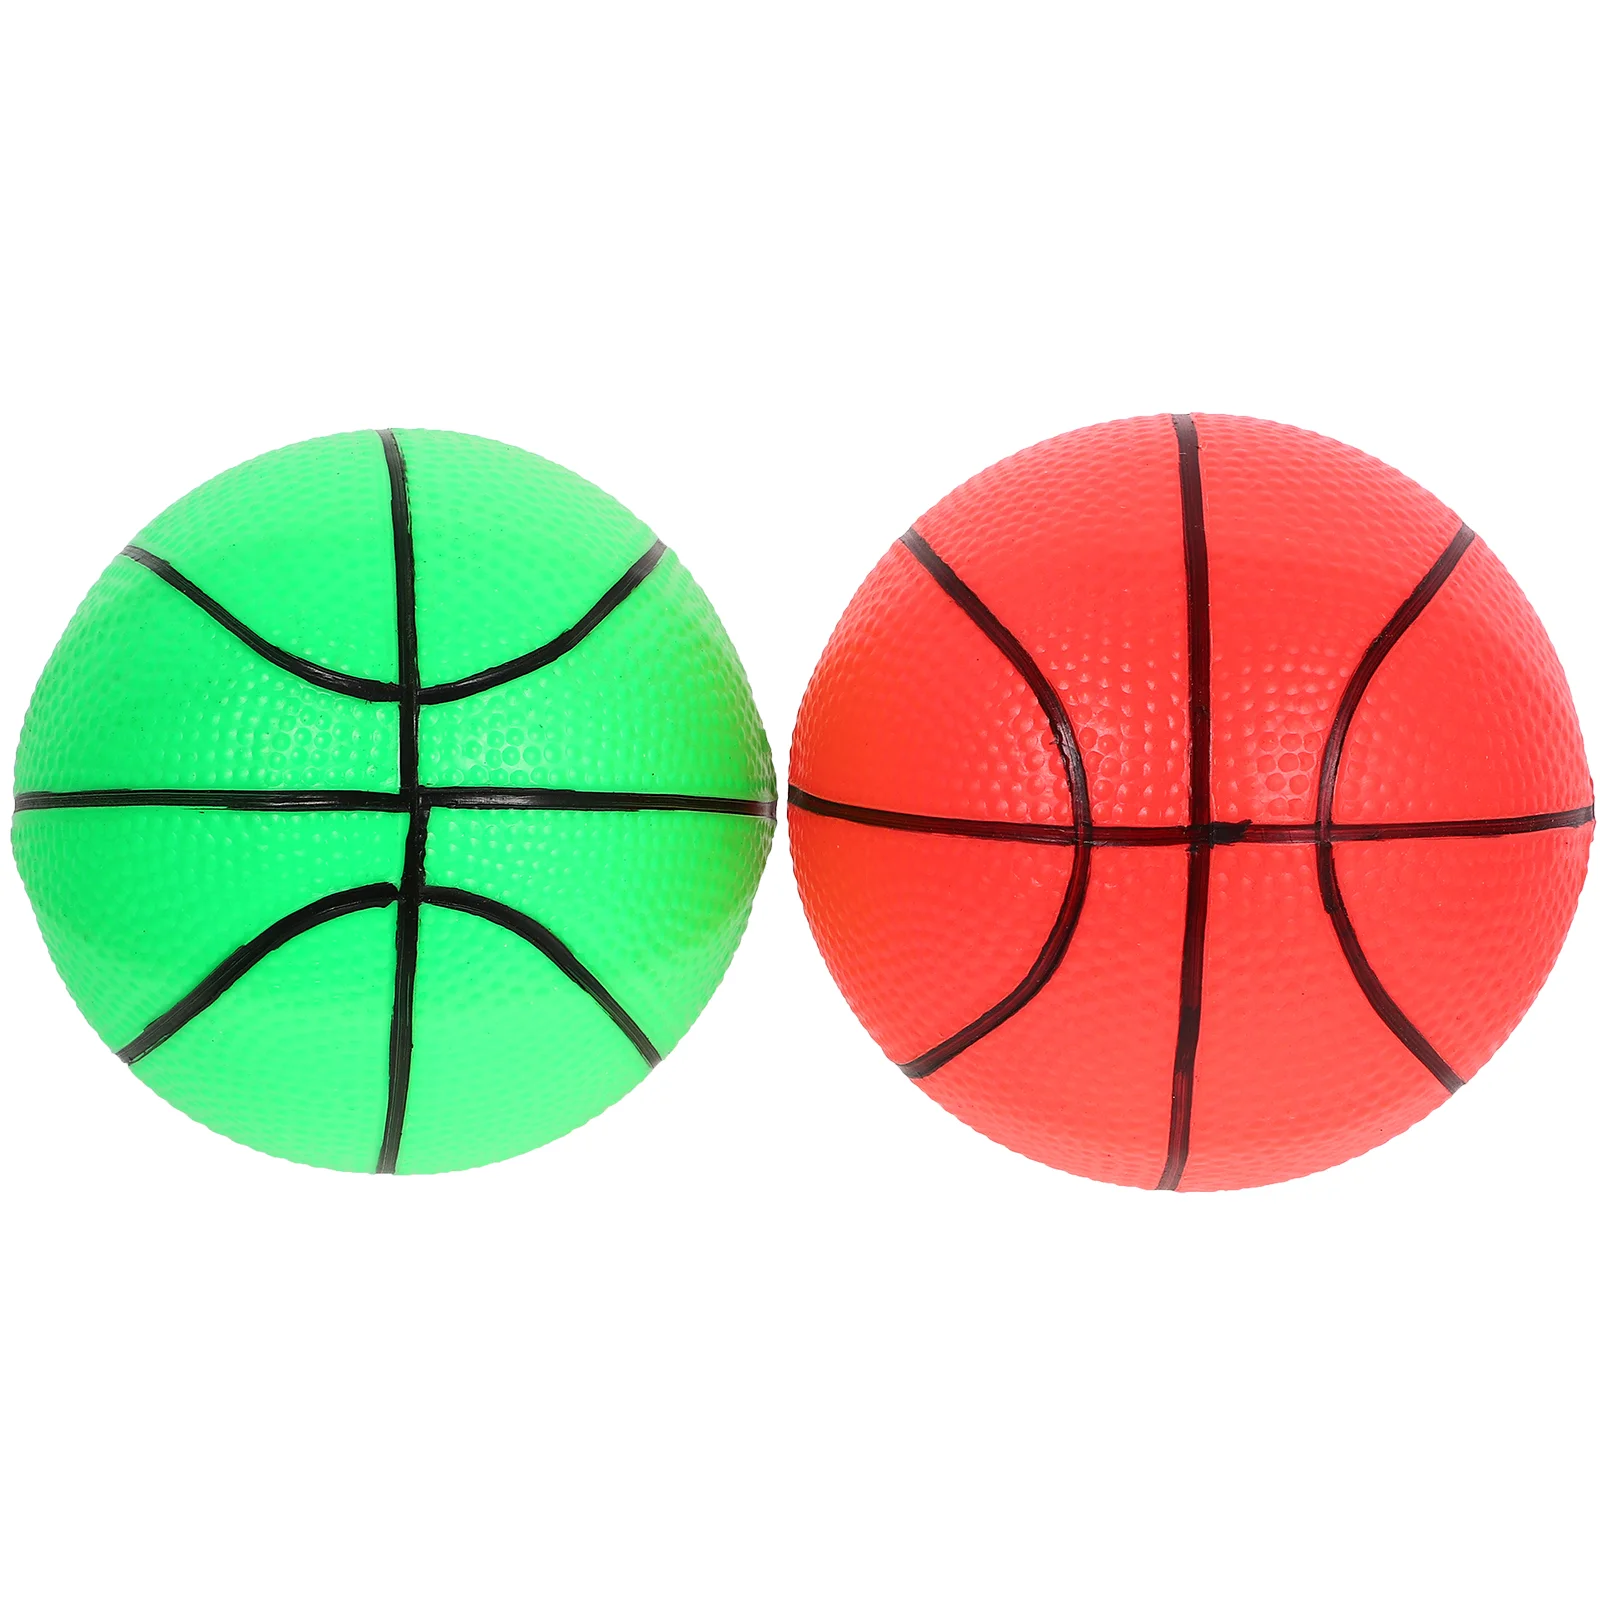 

2 Pcs Kids Basketball Outdoor Children’s Toys Thicken Soft for Indoor Mini Hoop Girls 8-12 Pvc Small Toddlers